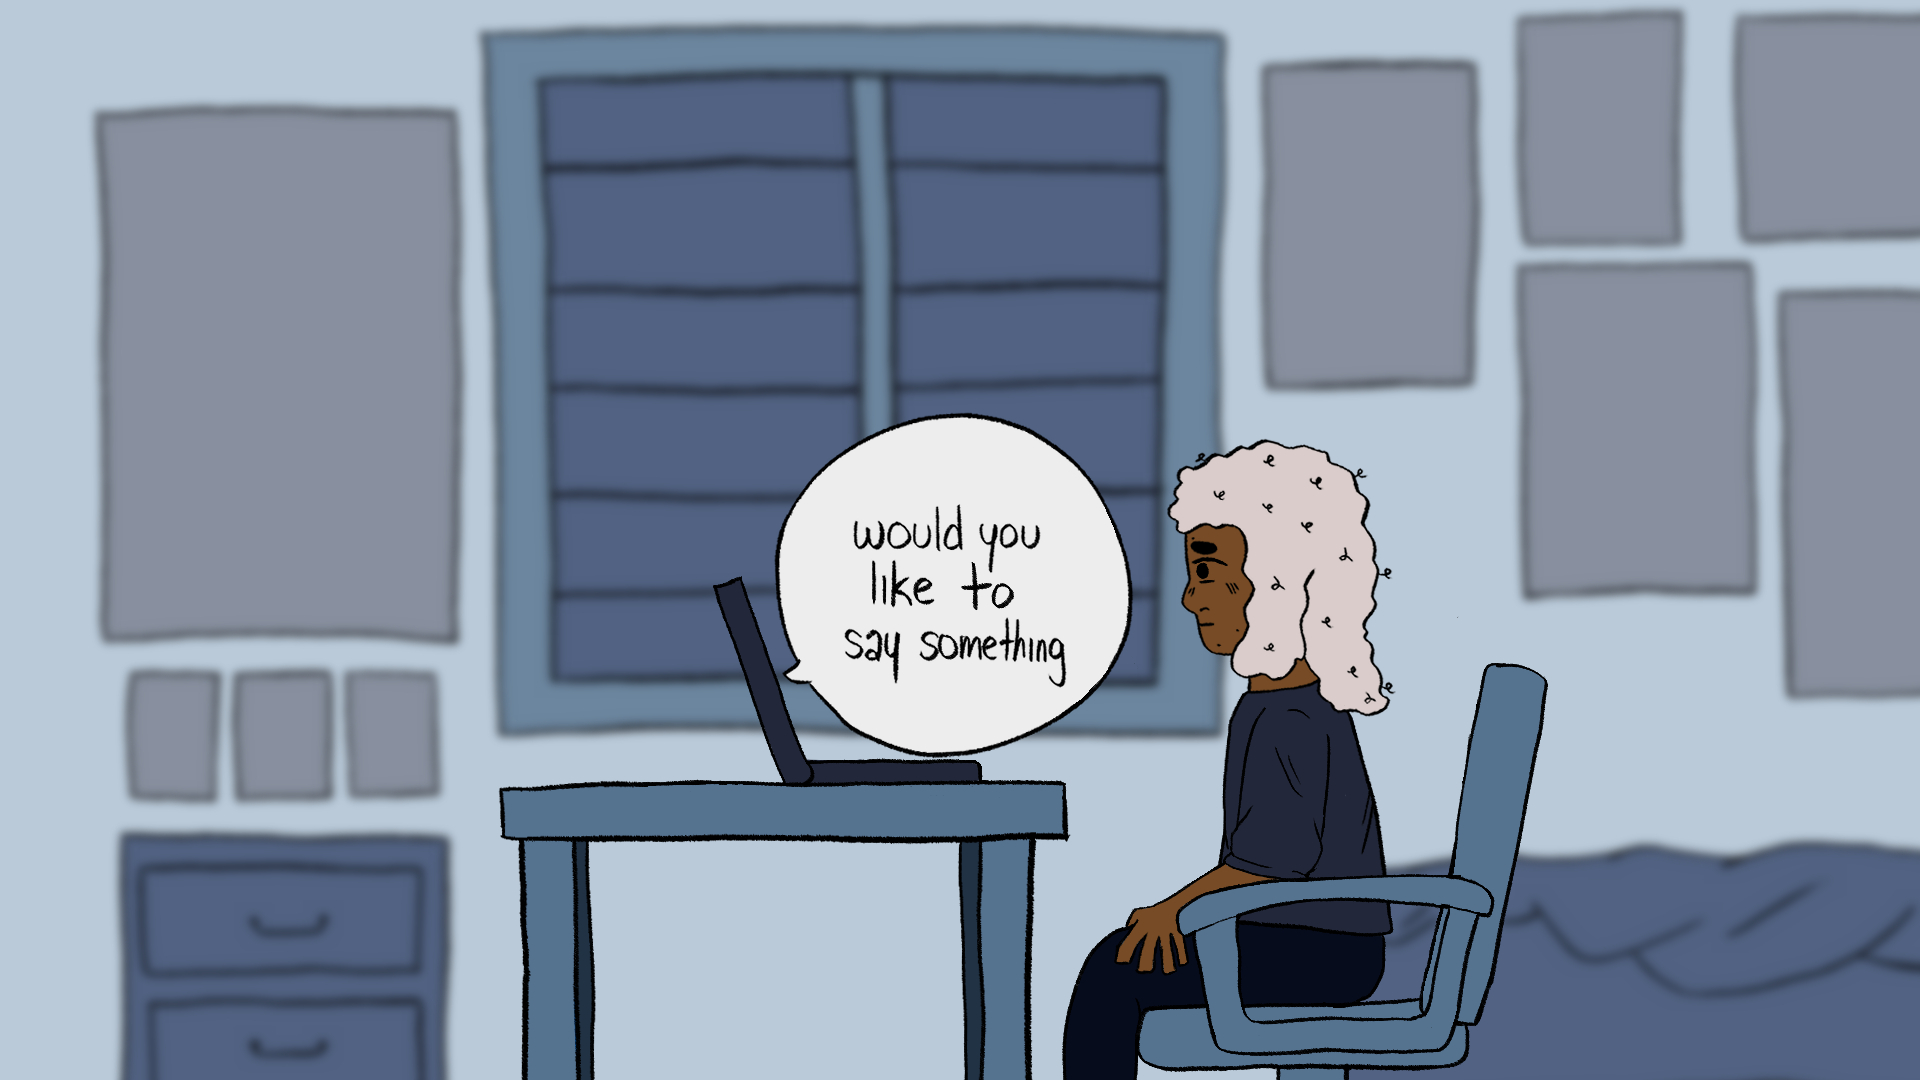 A still from an animated short film of the main character sat at a desk with a laptop on it, in a bedroom coloured in various shades of blue and purple. The background is blurred and has a large window, bed, side table, and nine blank posters of various sizes on the wall. The main character is in their twenties, has light pink curly shoulder length hair, dark brown skin, and is wearing a dark blue sweater and sweatpants. The main character is looking nervously at their laptop as a speech bubble saying "would you like to say something" is directed to the main character, the speech bubble tail pointing towards the laptop.